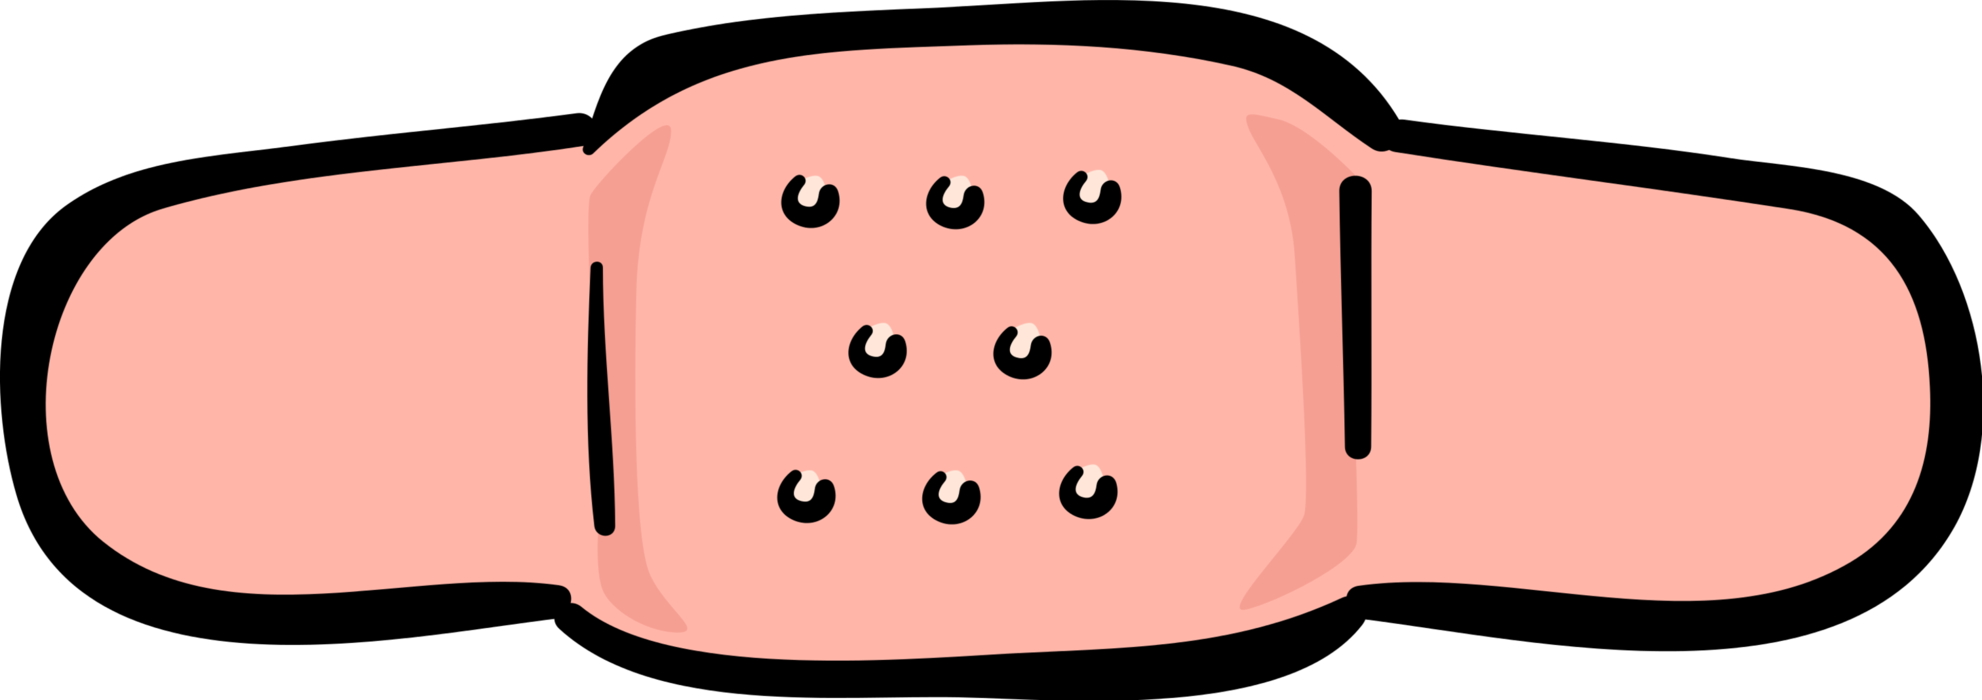 A Pink Object With Black Eyes